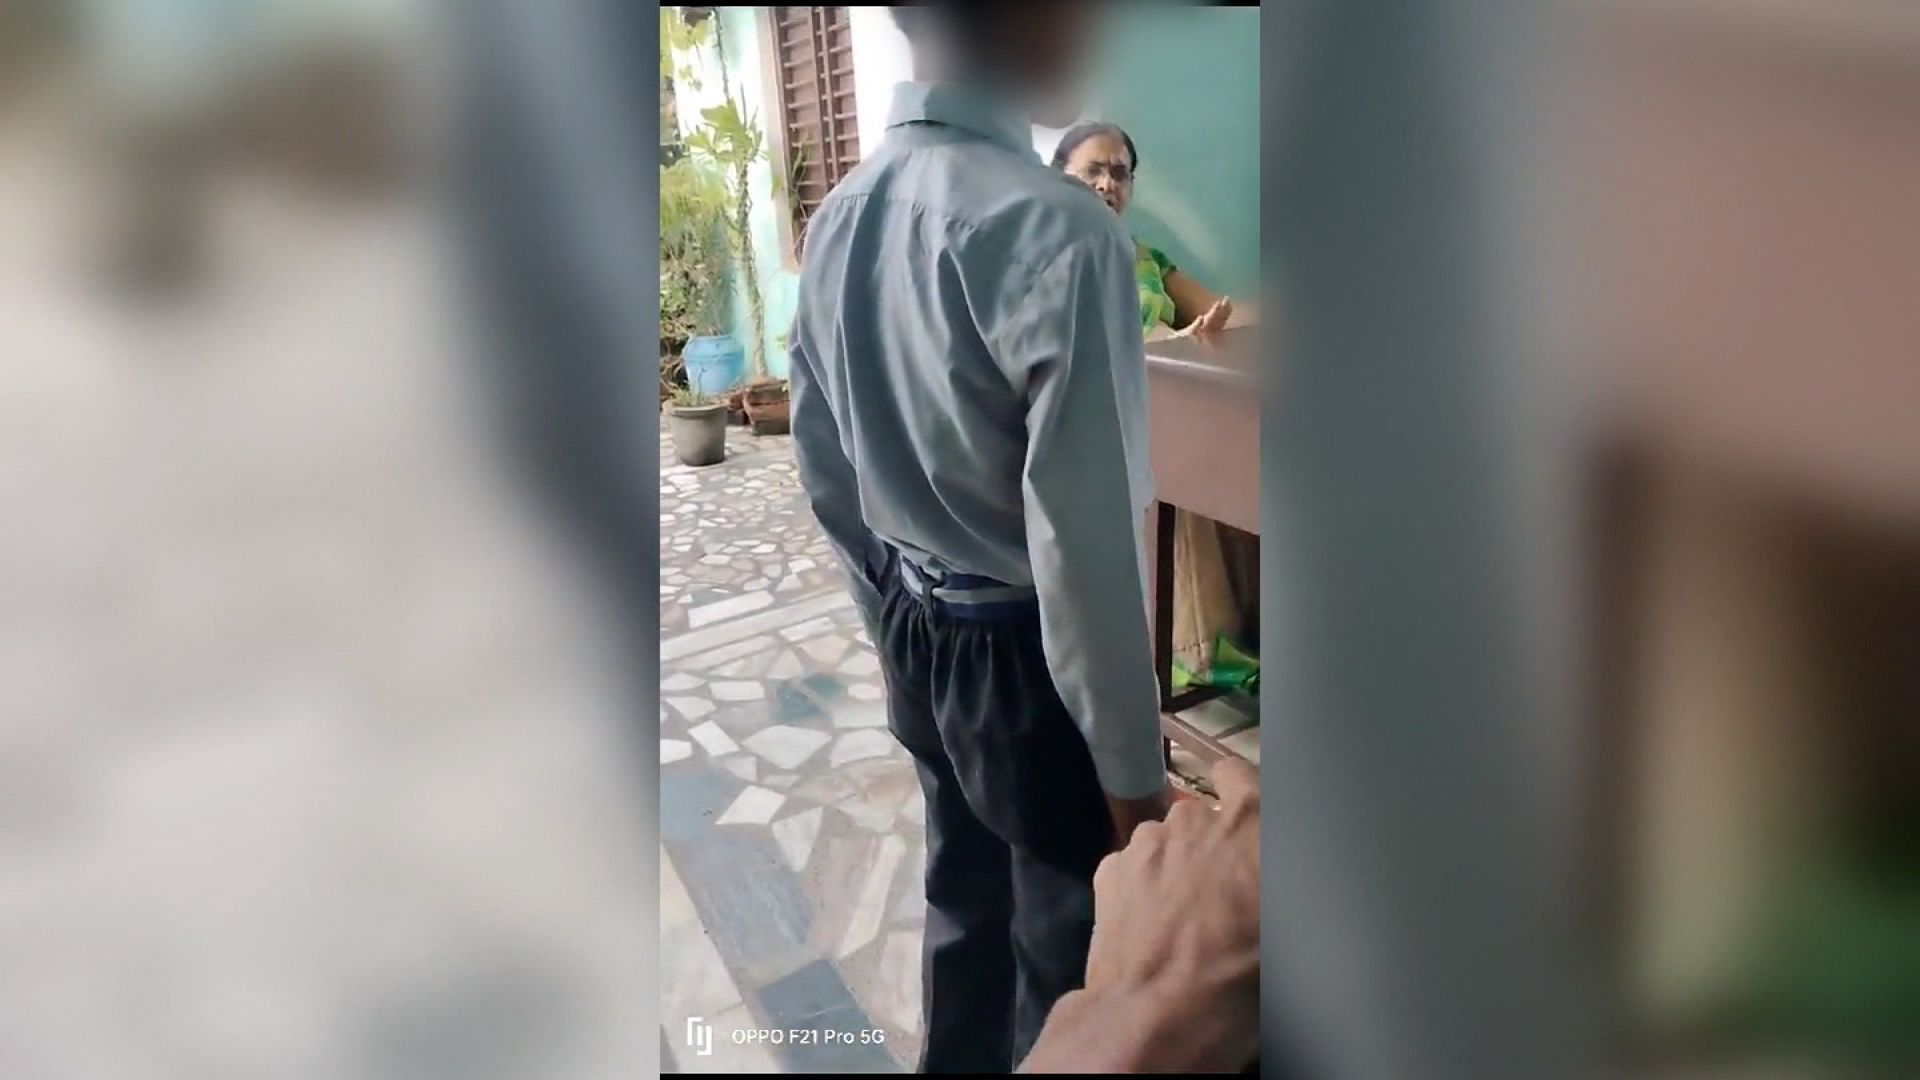 Indiana School Girl Sex Video - Outrage in India as teacher tells students to slap classmate who is Muslim  | CNN